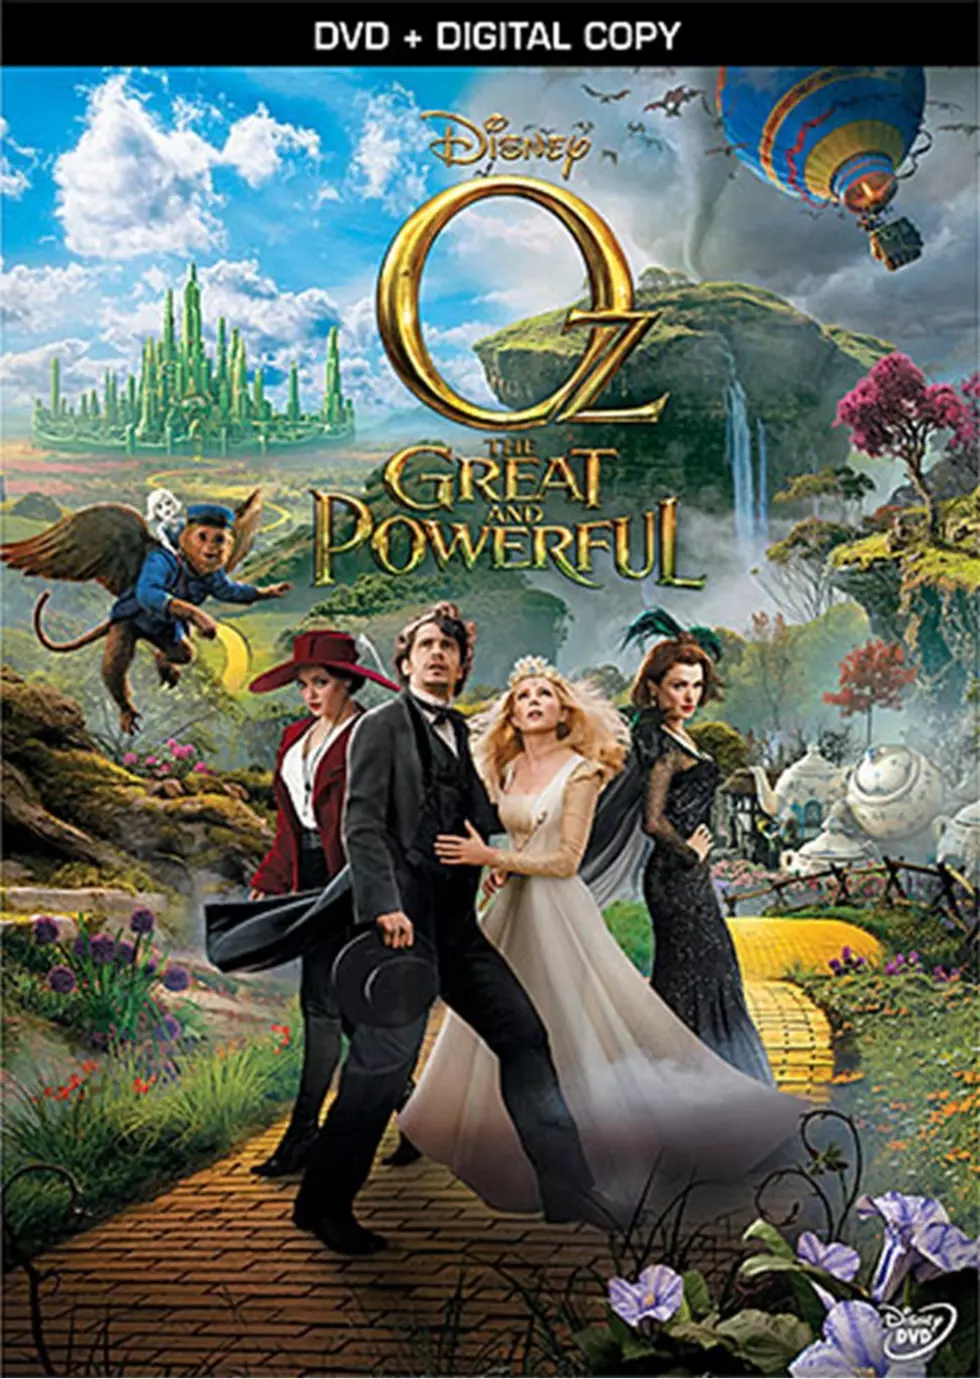 This Friday Night’s FREE Downtown Movie Is ” Oz, The Great And Powerful”